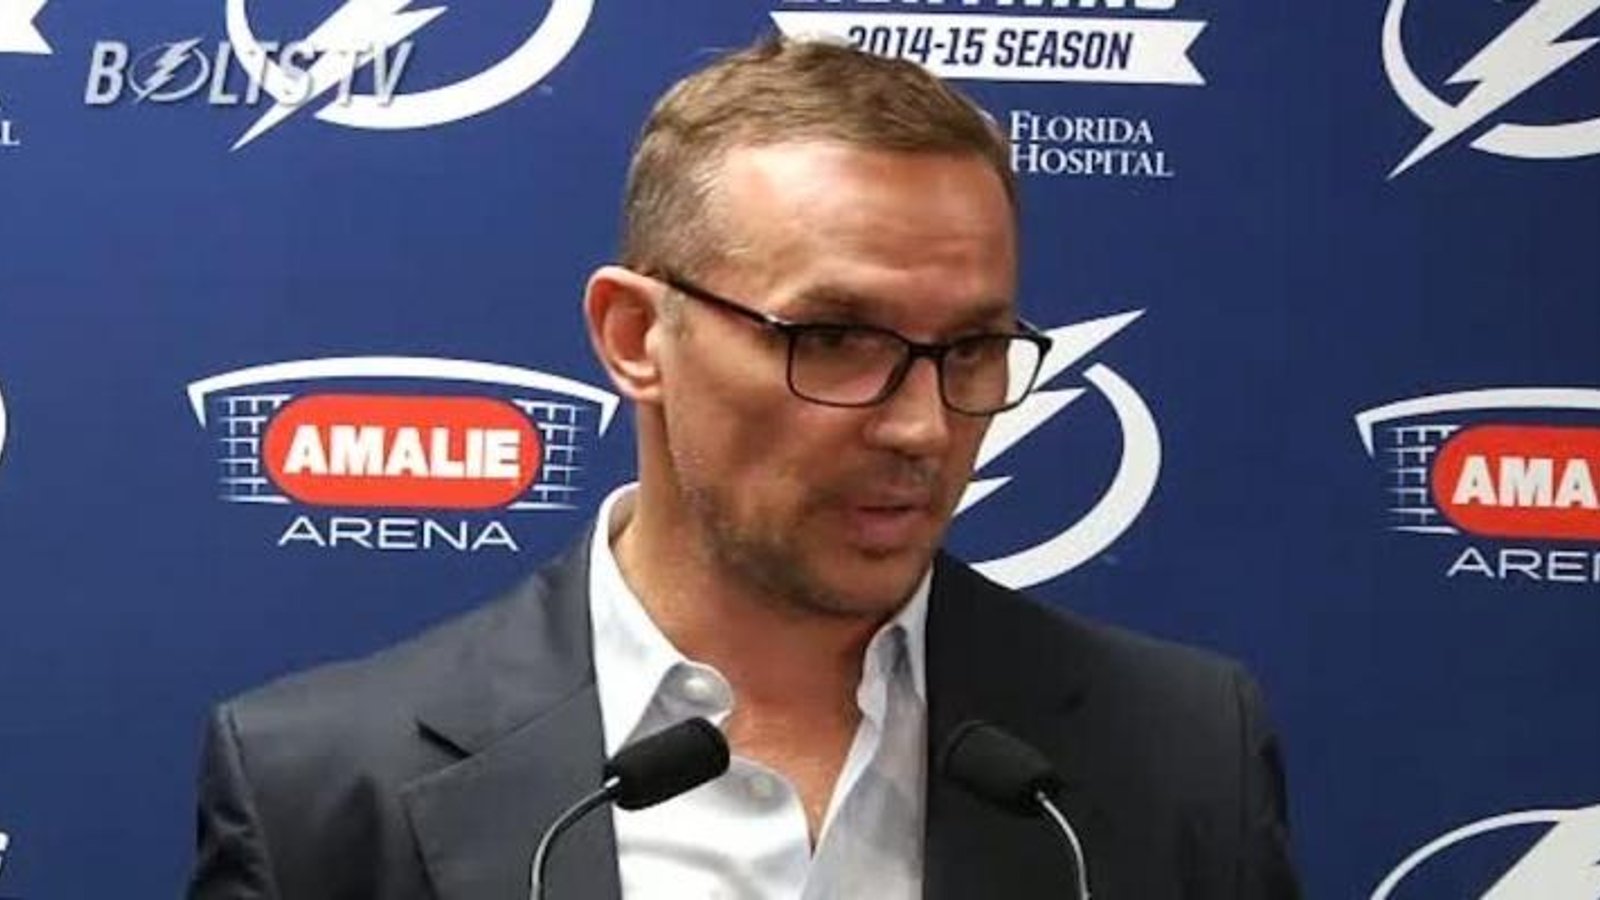 Tampa Bay GM Steve Yzerman comments on the Drouin situation.